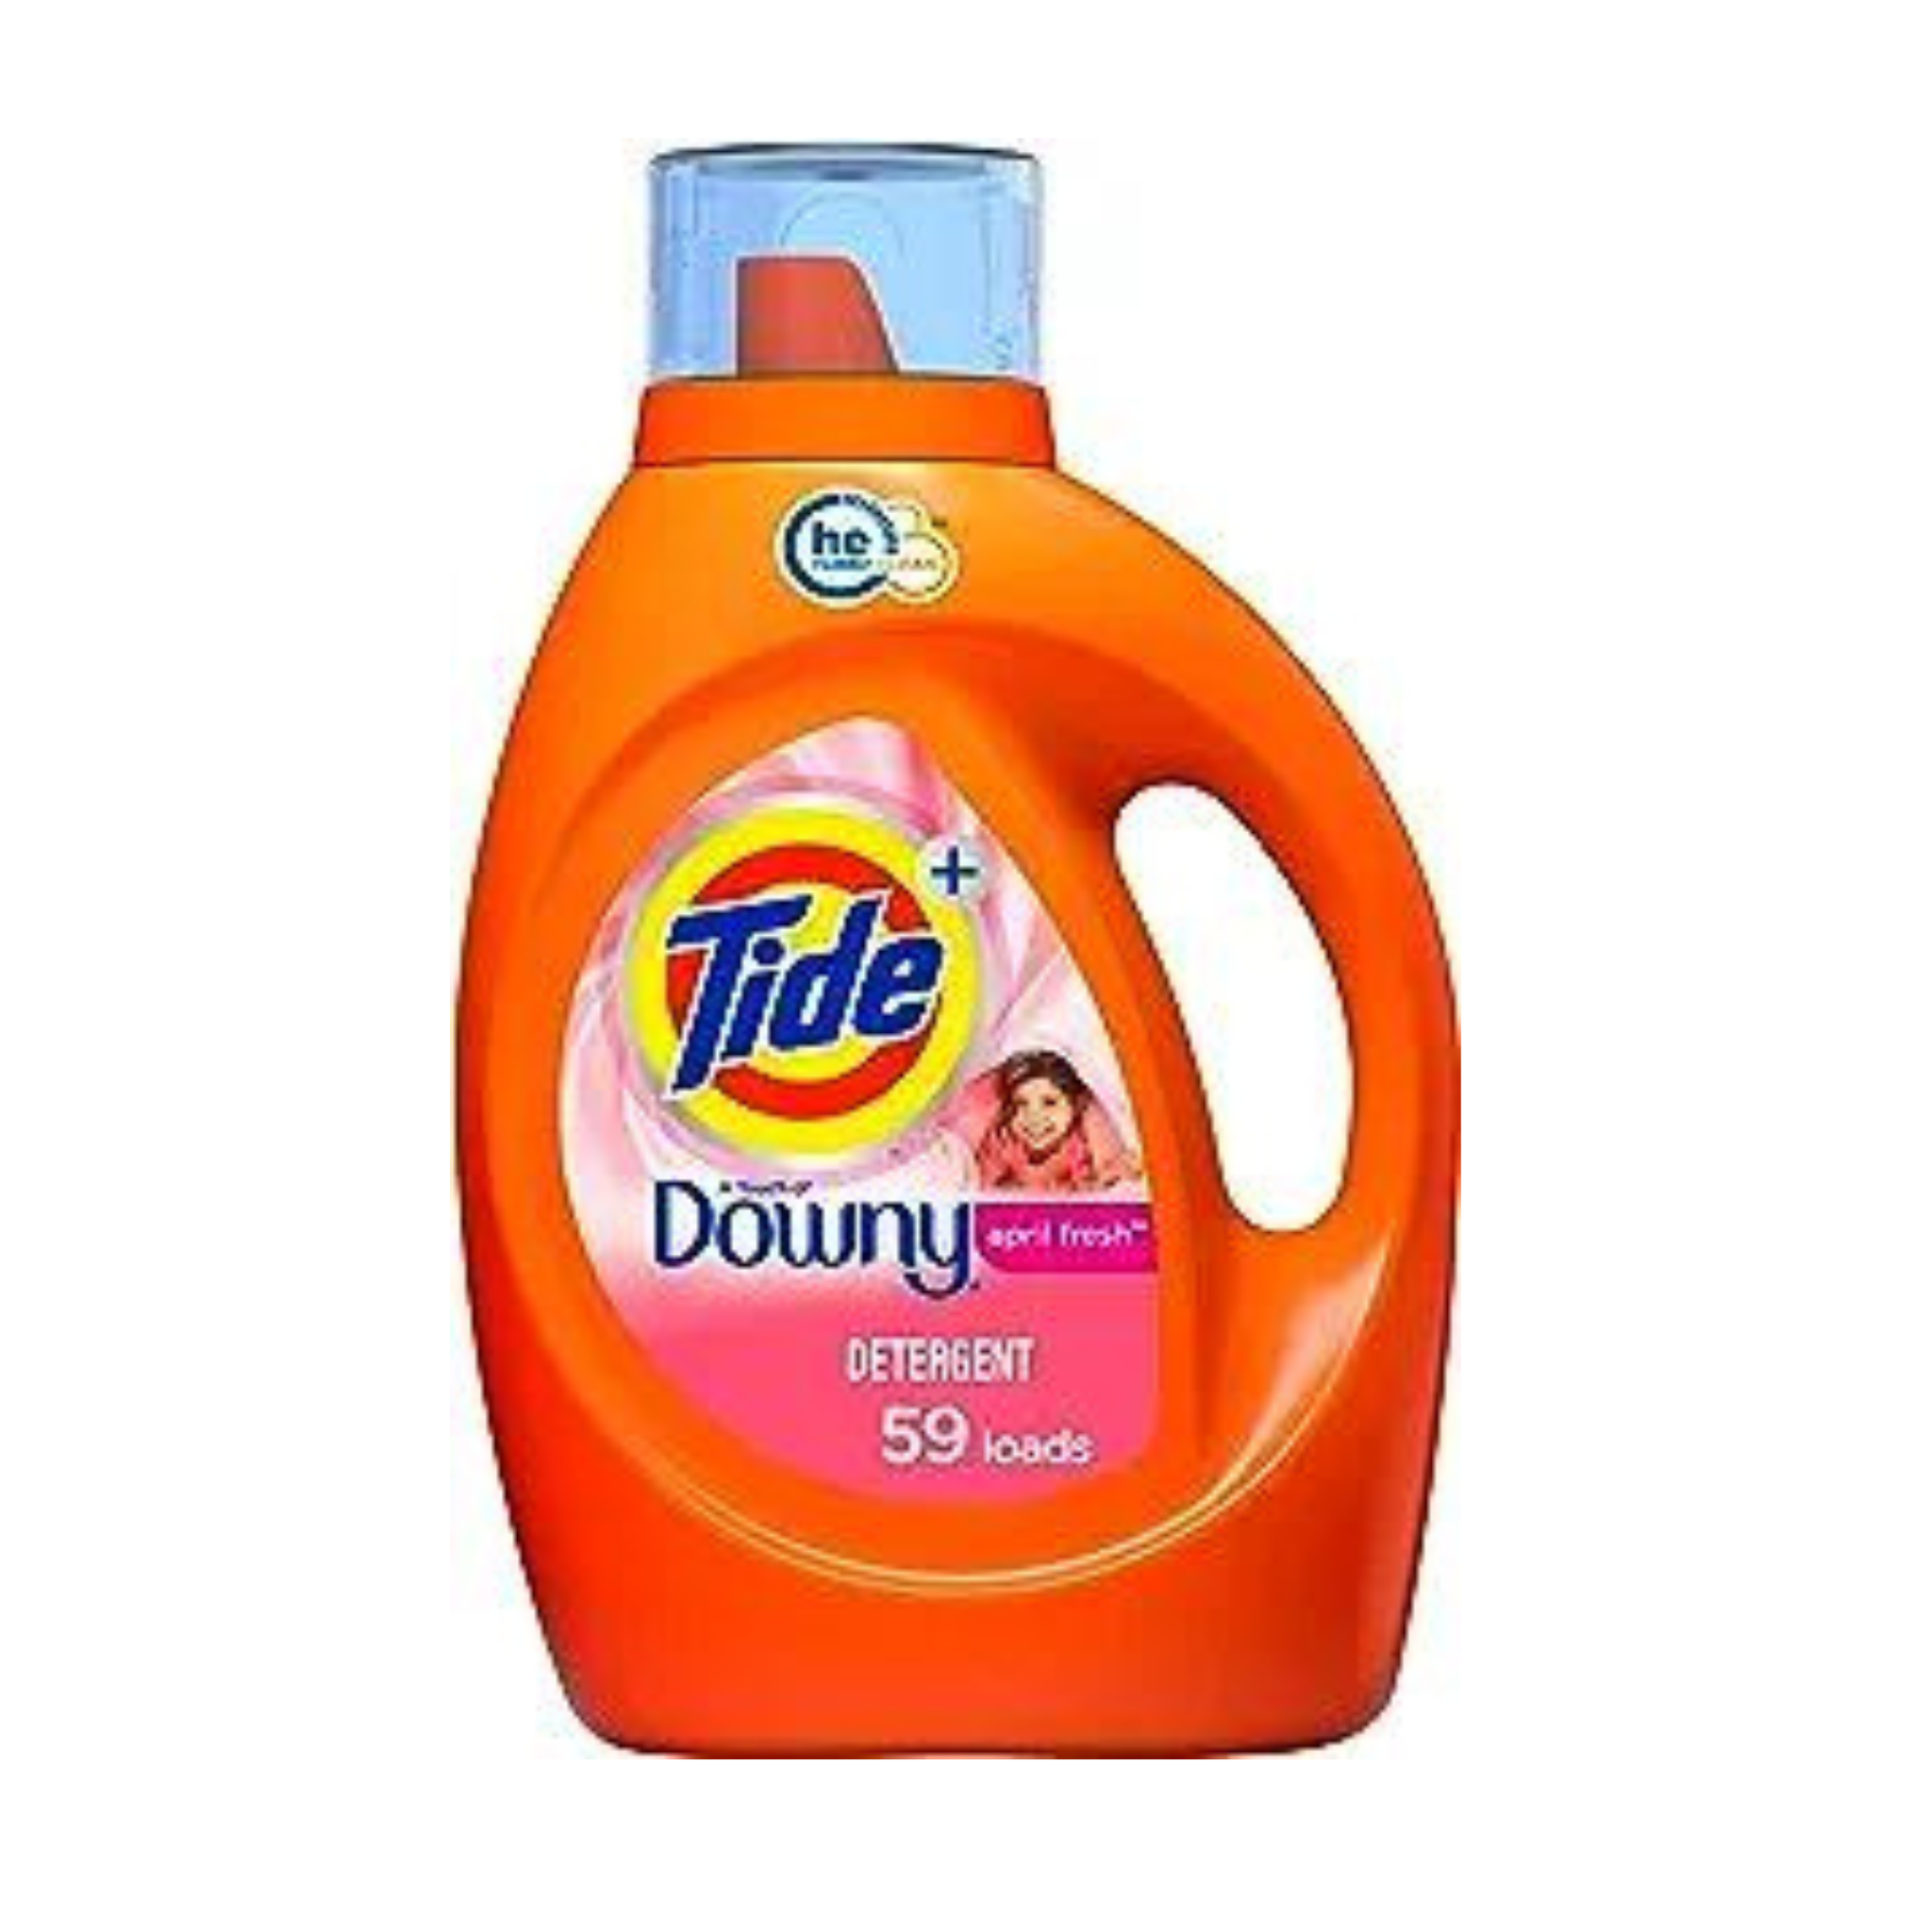 Tide with Downy Laundry Detergent (HE), April Fresh Scent, 59 Loads (92 Fl Oz)